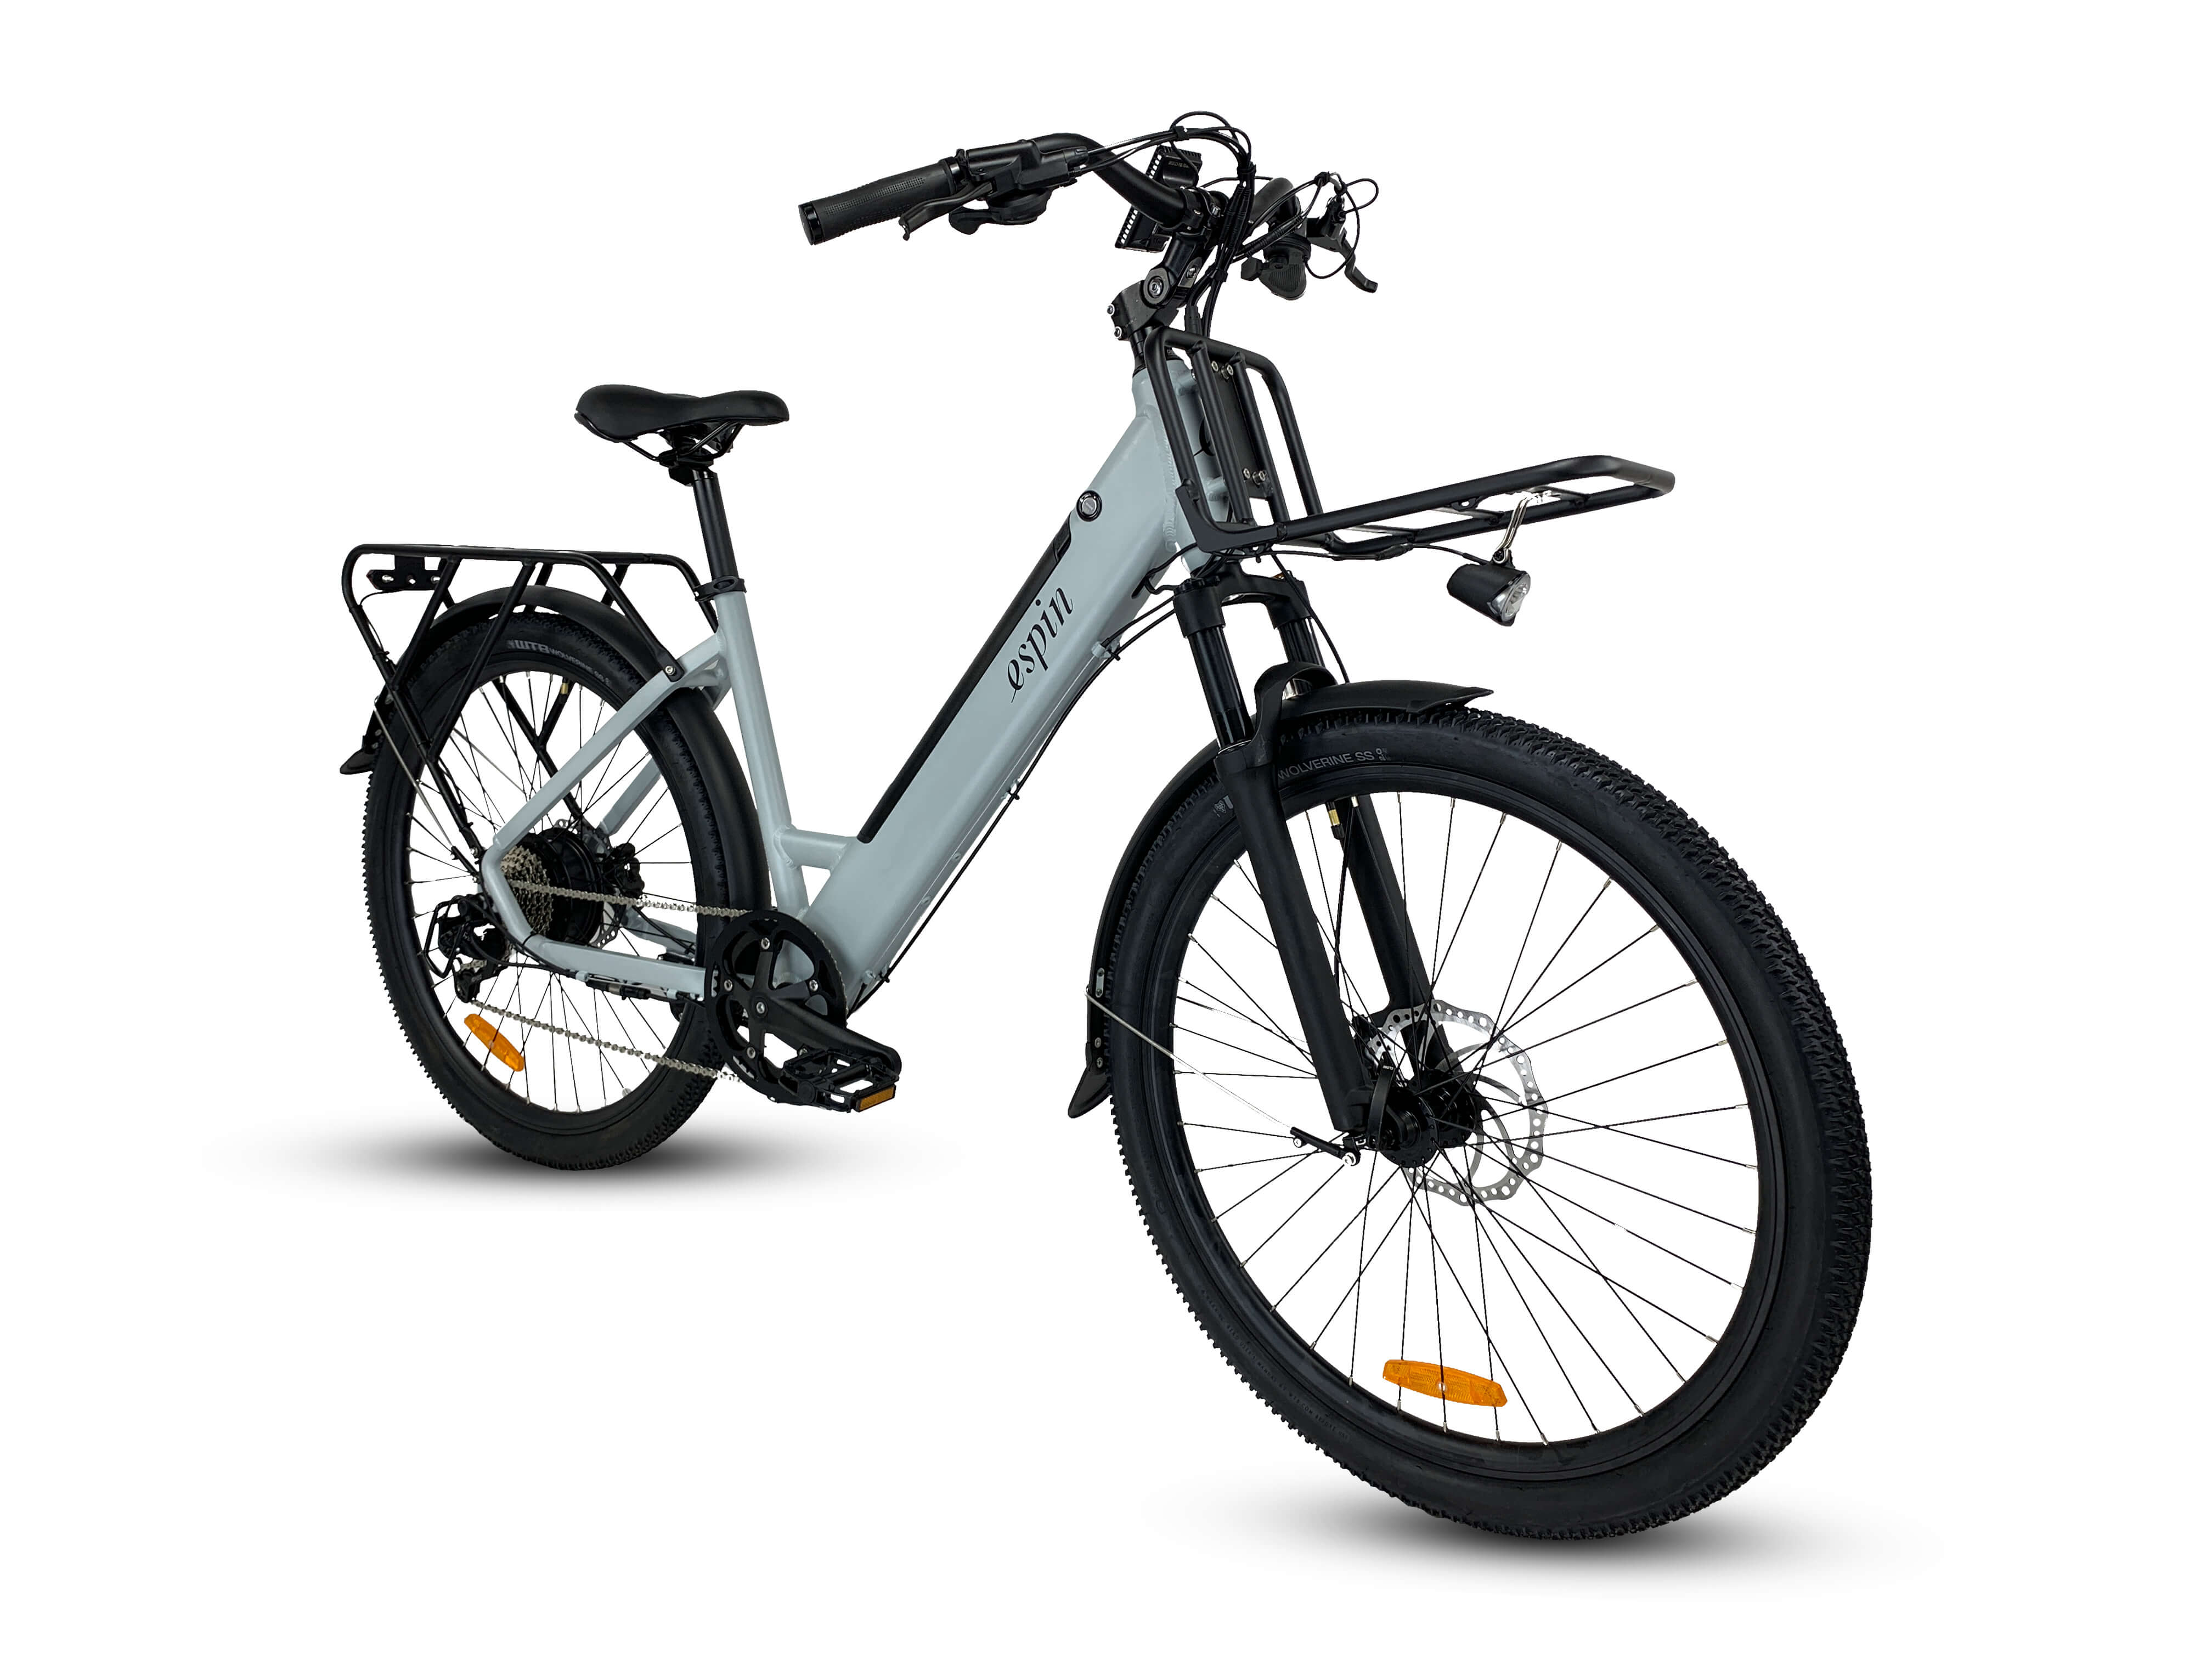 Espin Flow Folding Fat Tire Electric Bike & City Bicycle & urban commuter for zipping from city streets to train to work